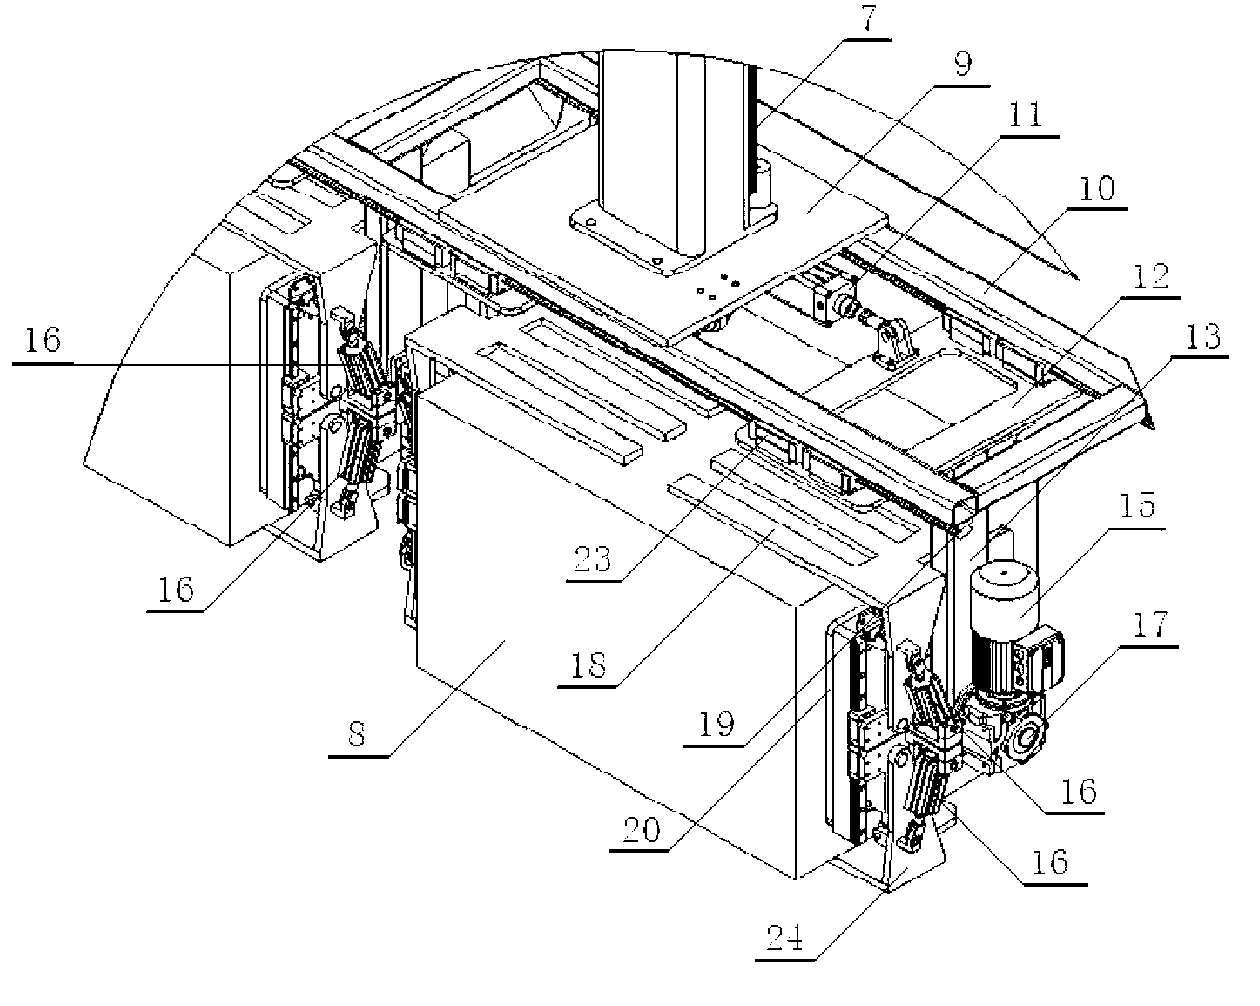 Multi-functional mechanical grabbing and transporting device capable of unstacking and overturning automatically